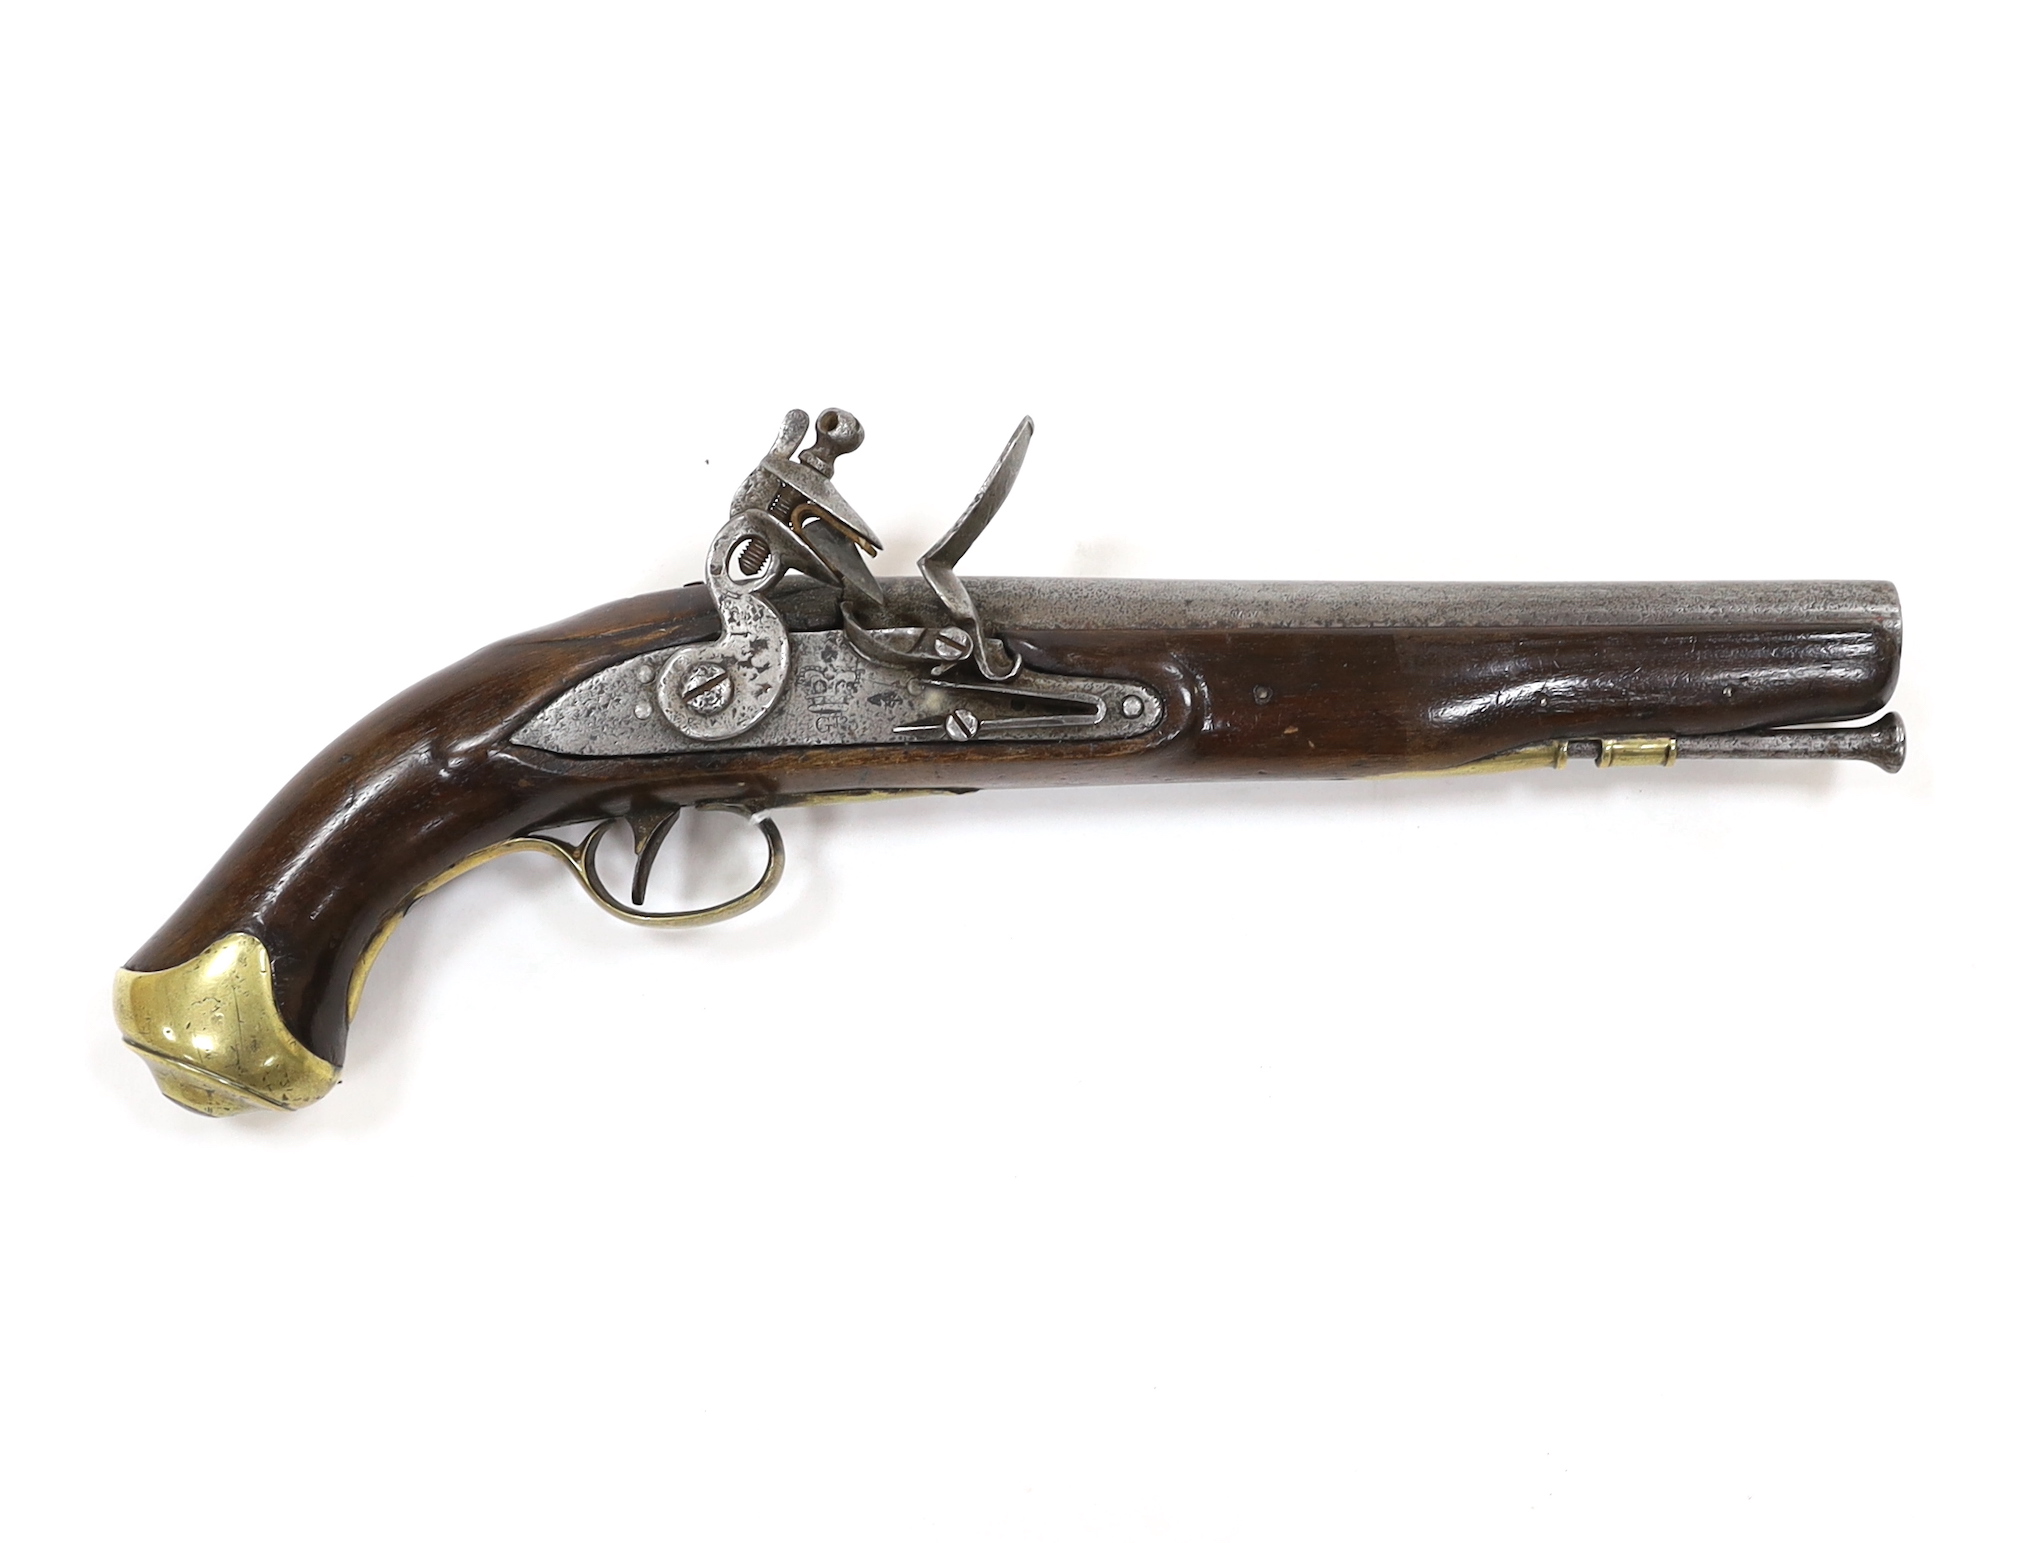 A Regulation type, brass mounted flintlock service pistol, barrel 22.5cm, with associated regulation brass mounts and iron ramrod, lock engraved with crowned GR